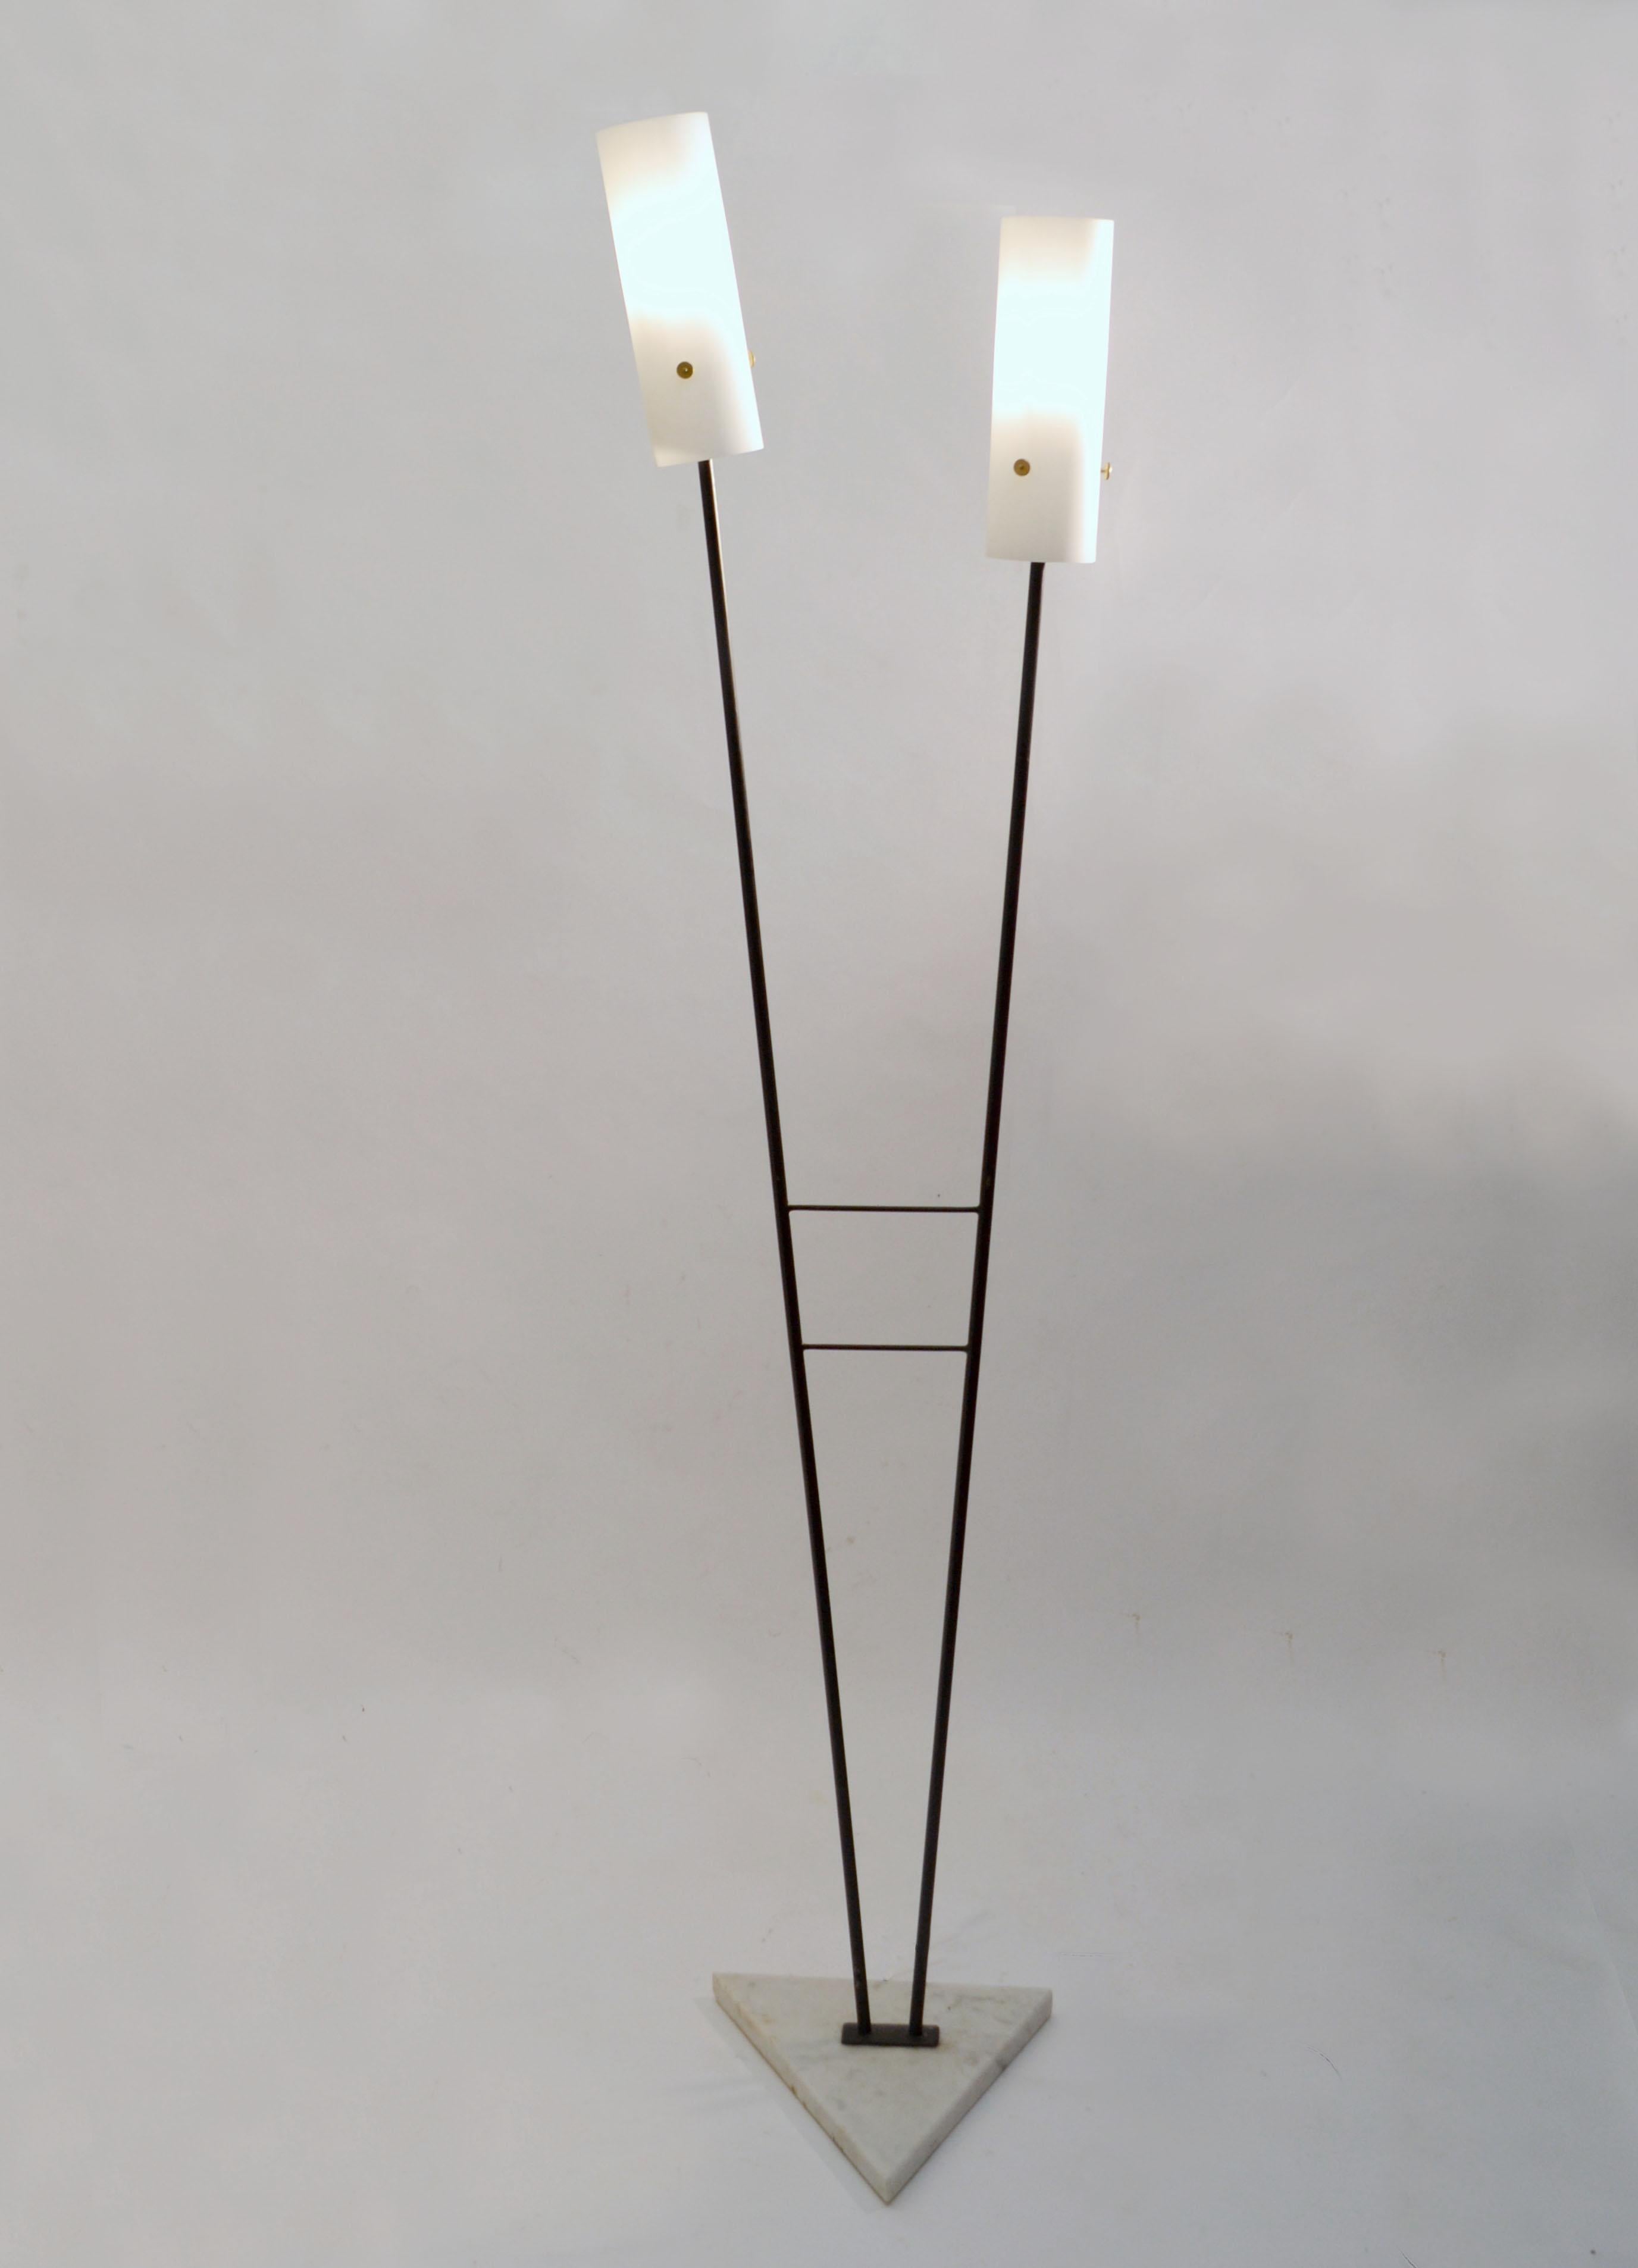 Pair of 1960's floor lamps with opaline glass cone shape cone shape shades and double V shape black metal stems lead a to on triangle Carrara marble bases. The black lacquered frame create a strong shaped geometrical silhouette. 
It is rare to find